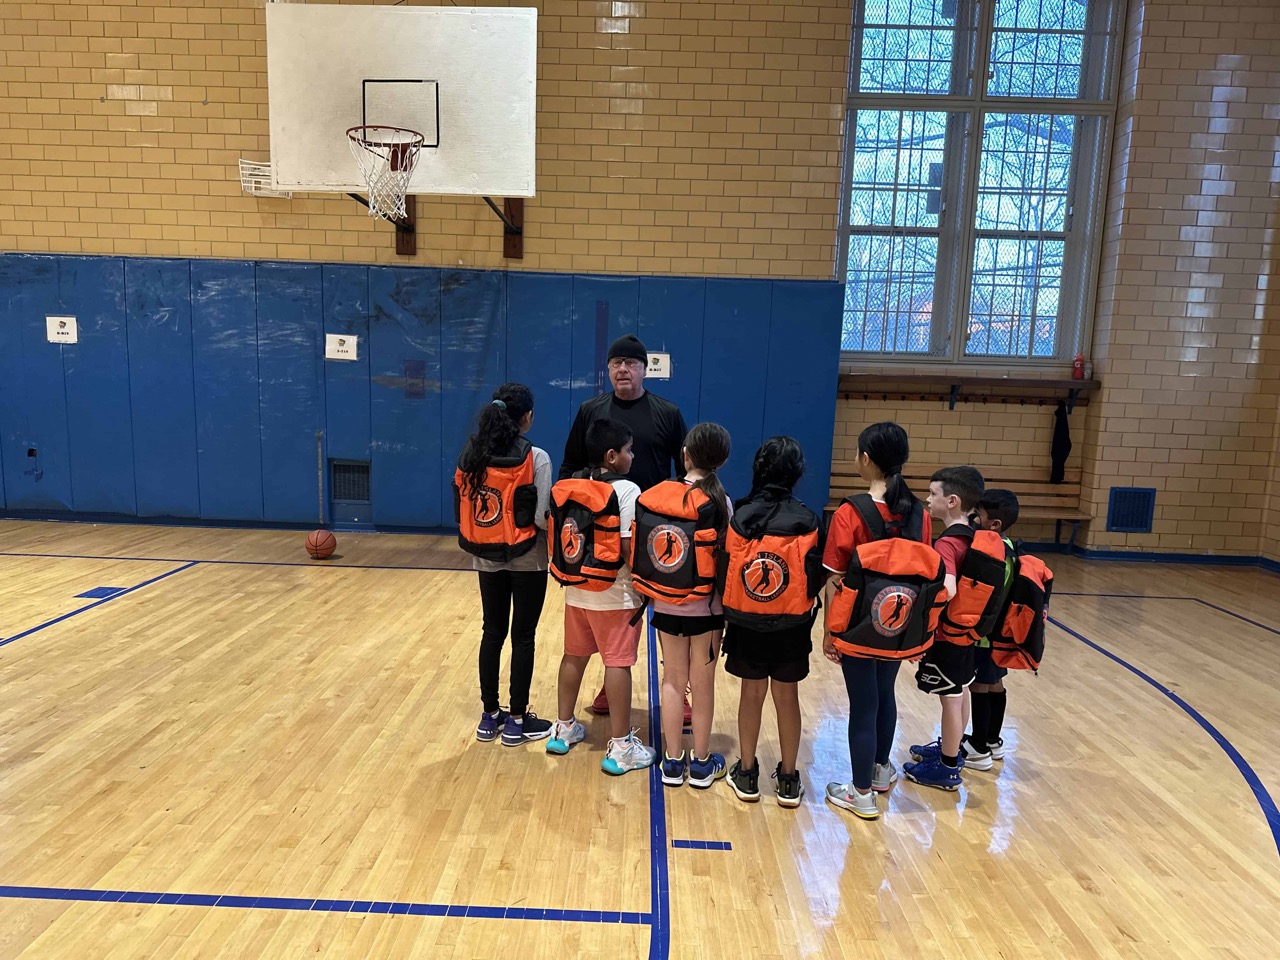 Children’s basketball instructional group wearing the new SIBL back pack with the Commissioner 3/23